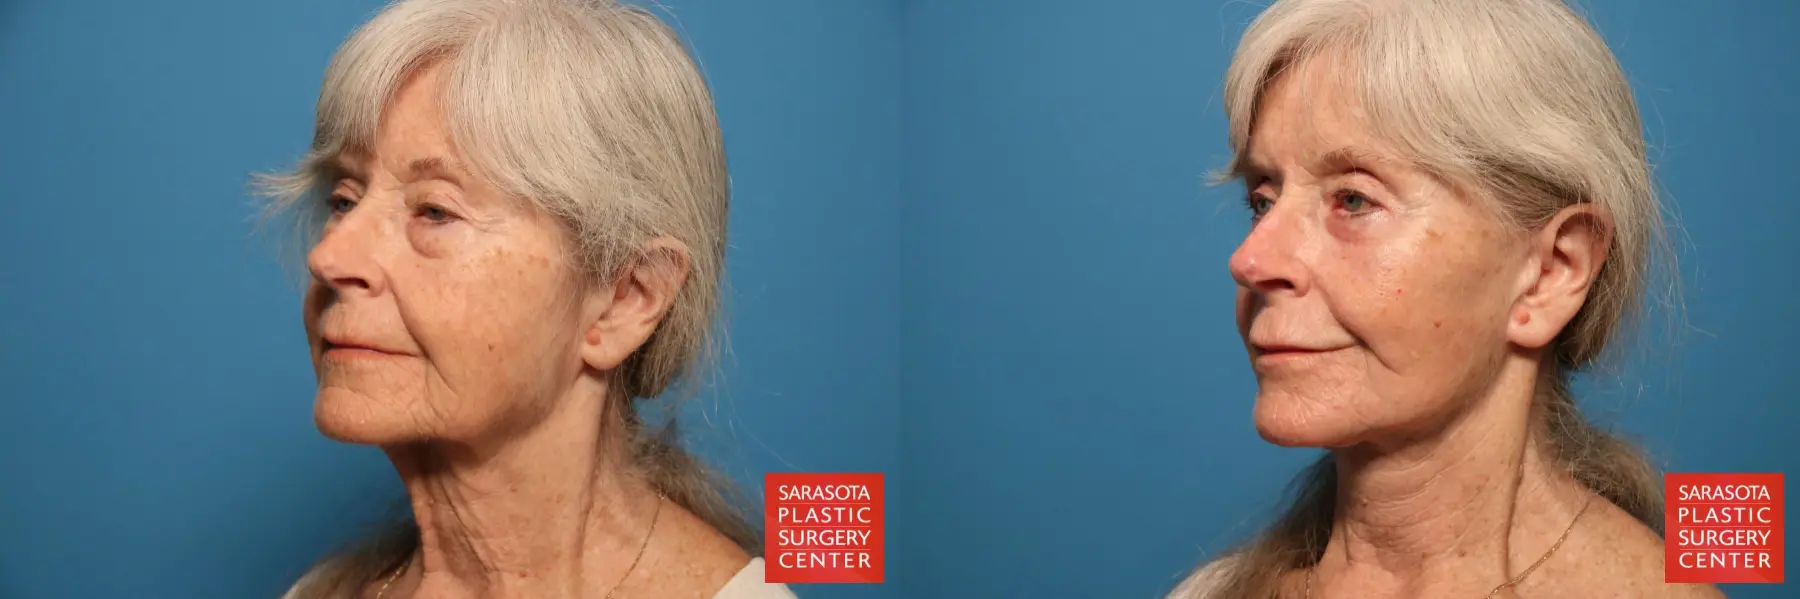 Facelift Revision: Patient 1 - Before and After 2